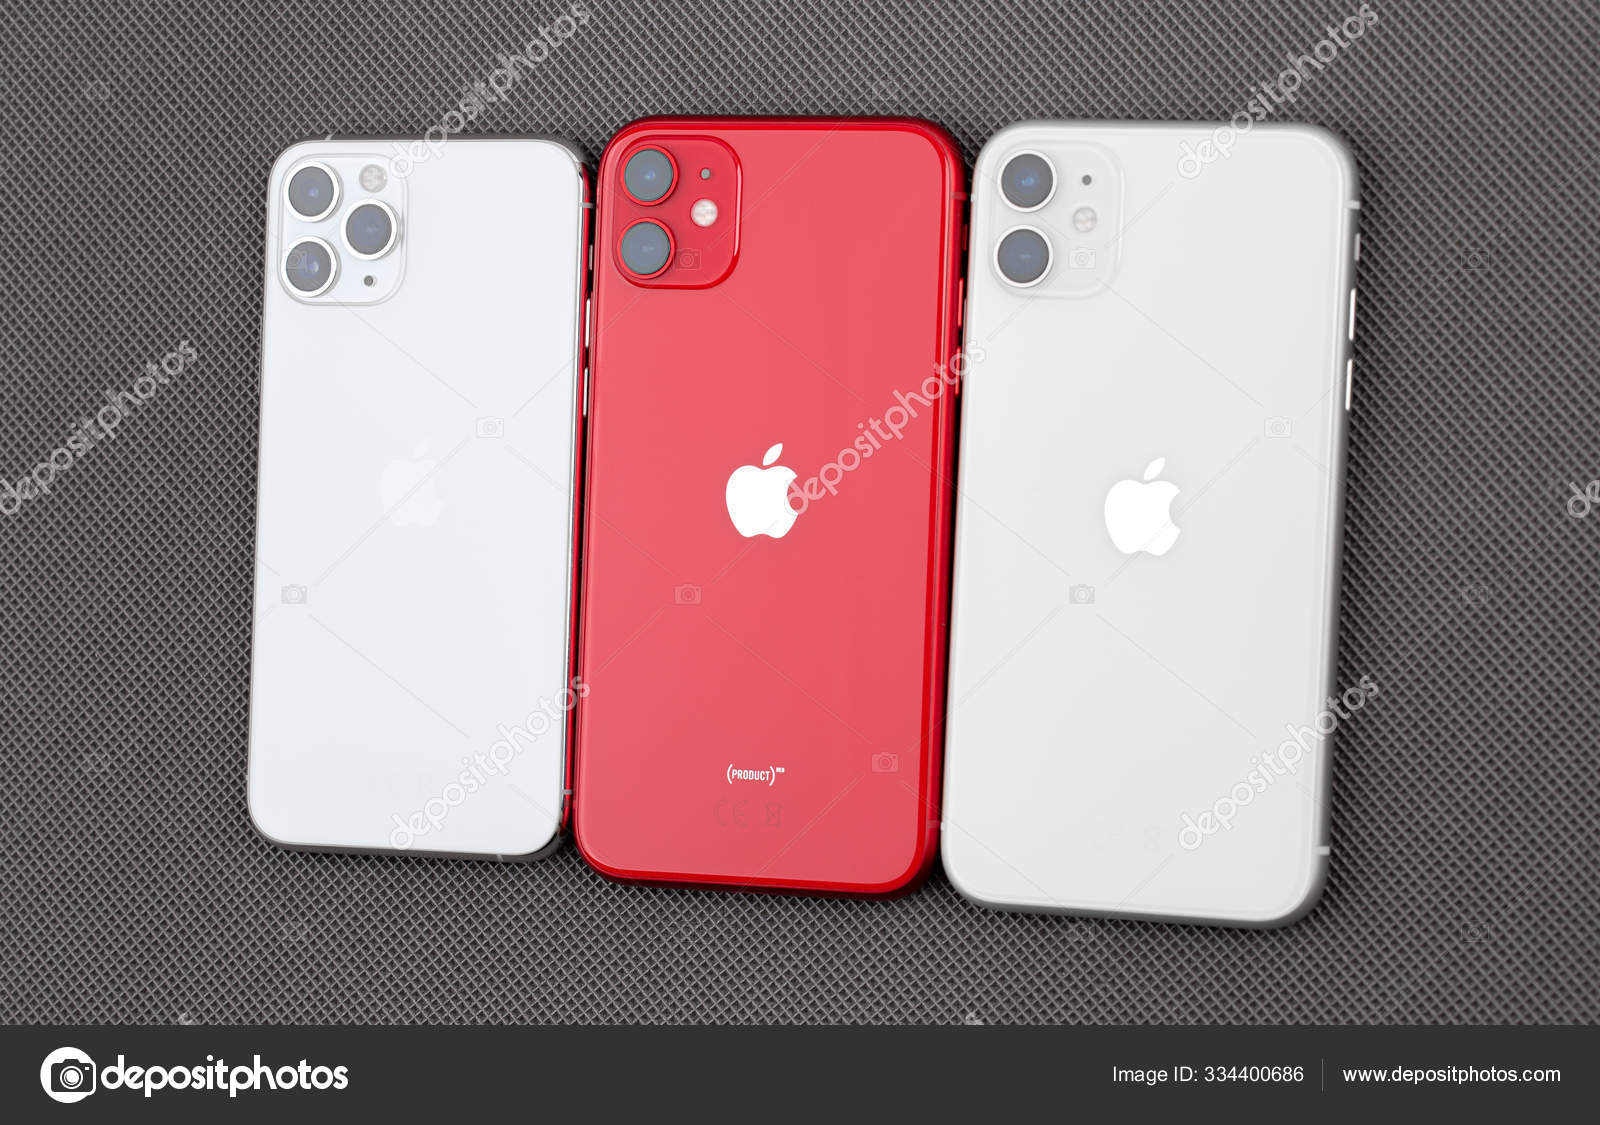 Apple Iphone 11 Product Red Apple Iphone 11 White And Apple Iphone 11 Pro Silver Color On A Gray Surface Stock Editorial Photo C Seremin